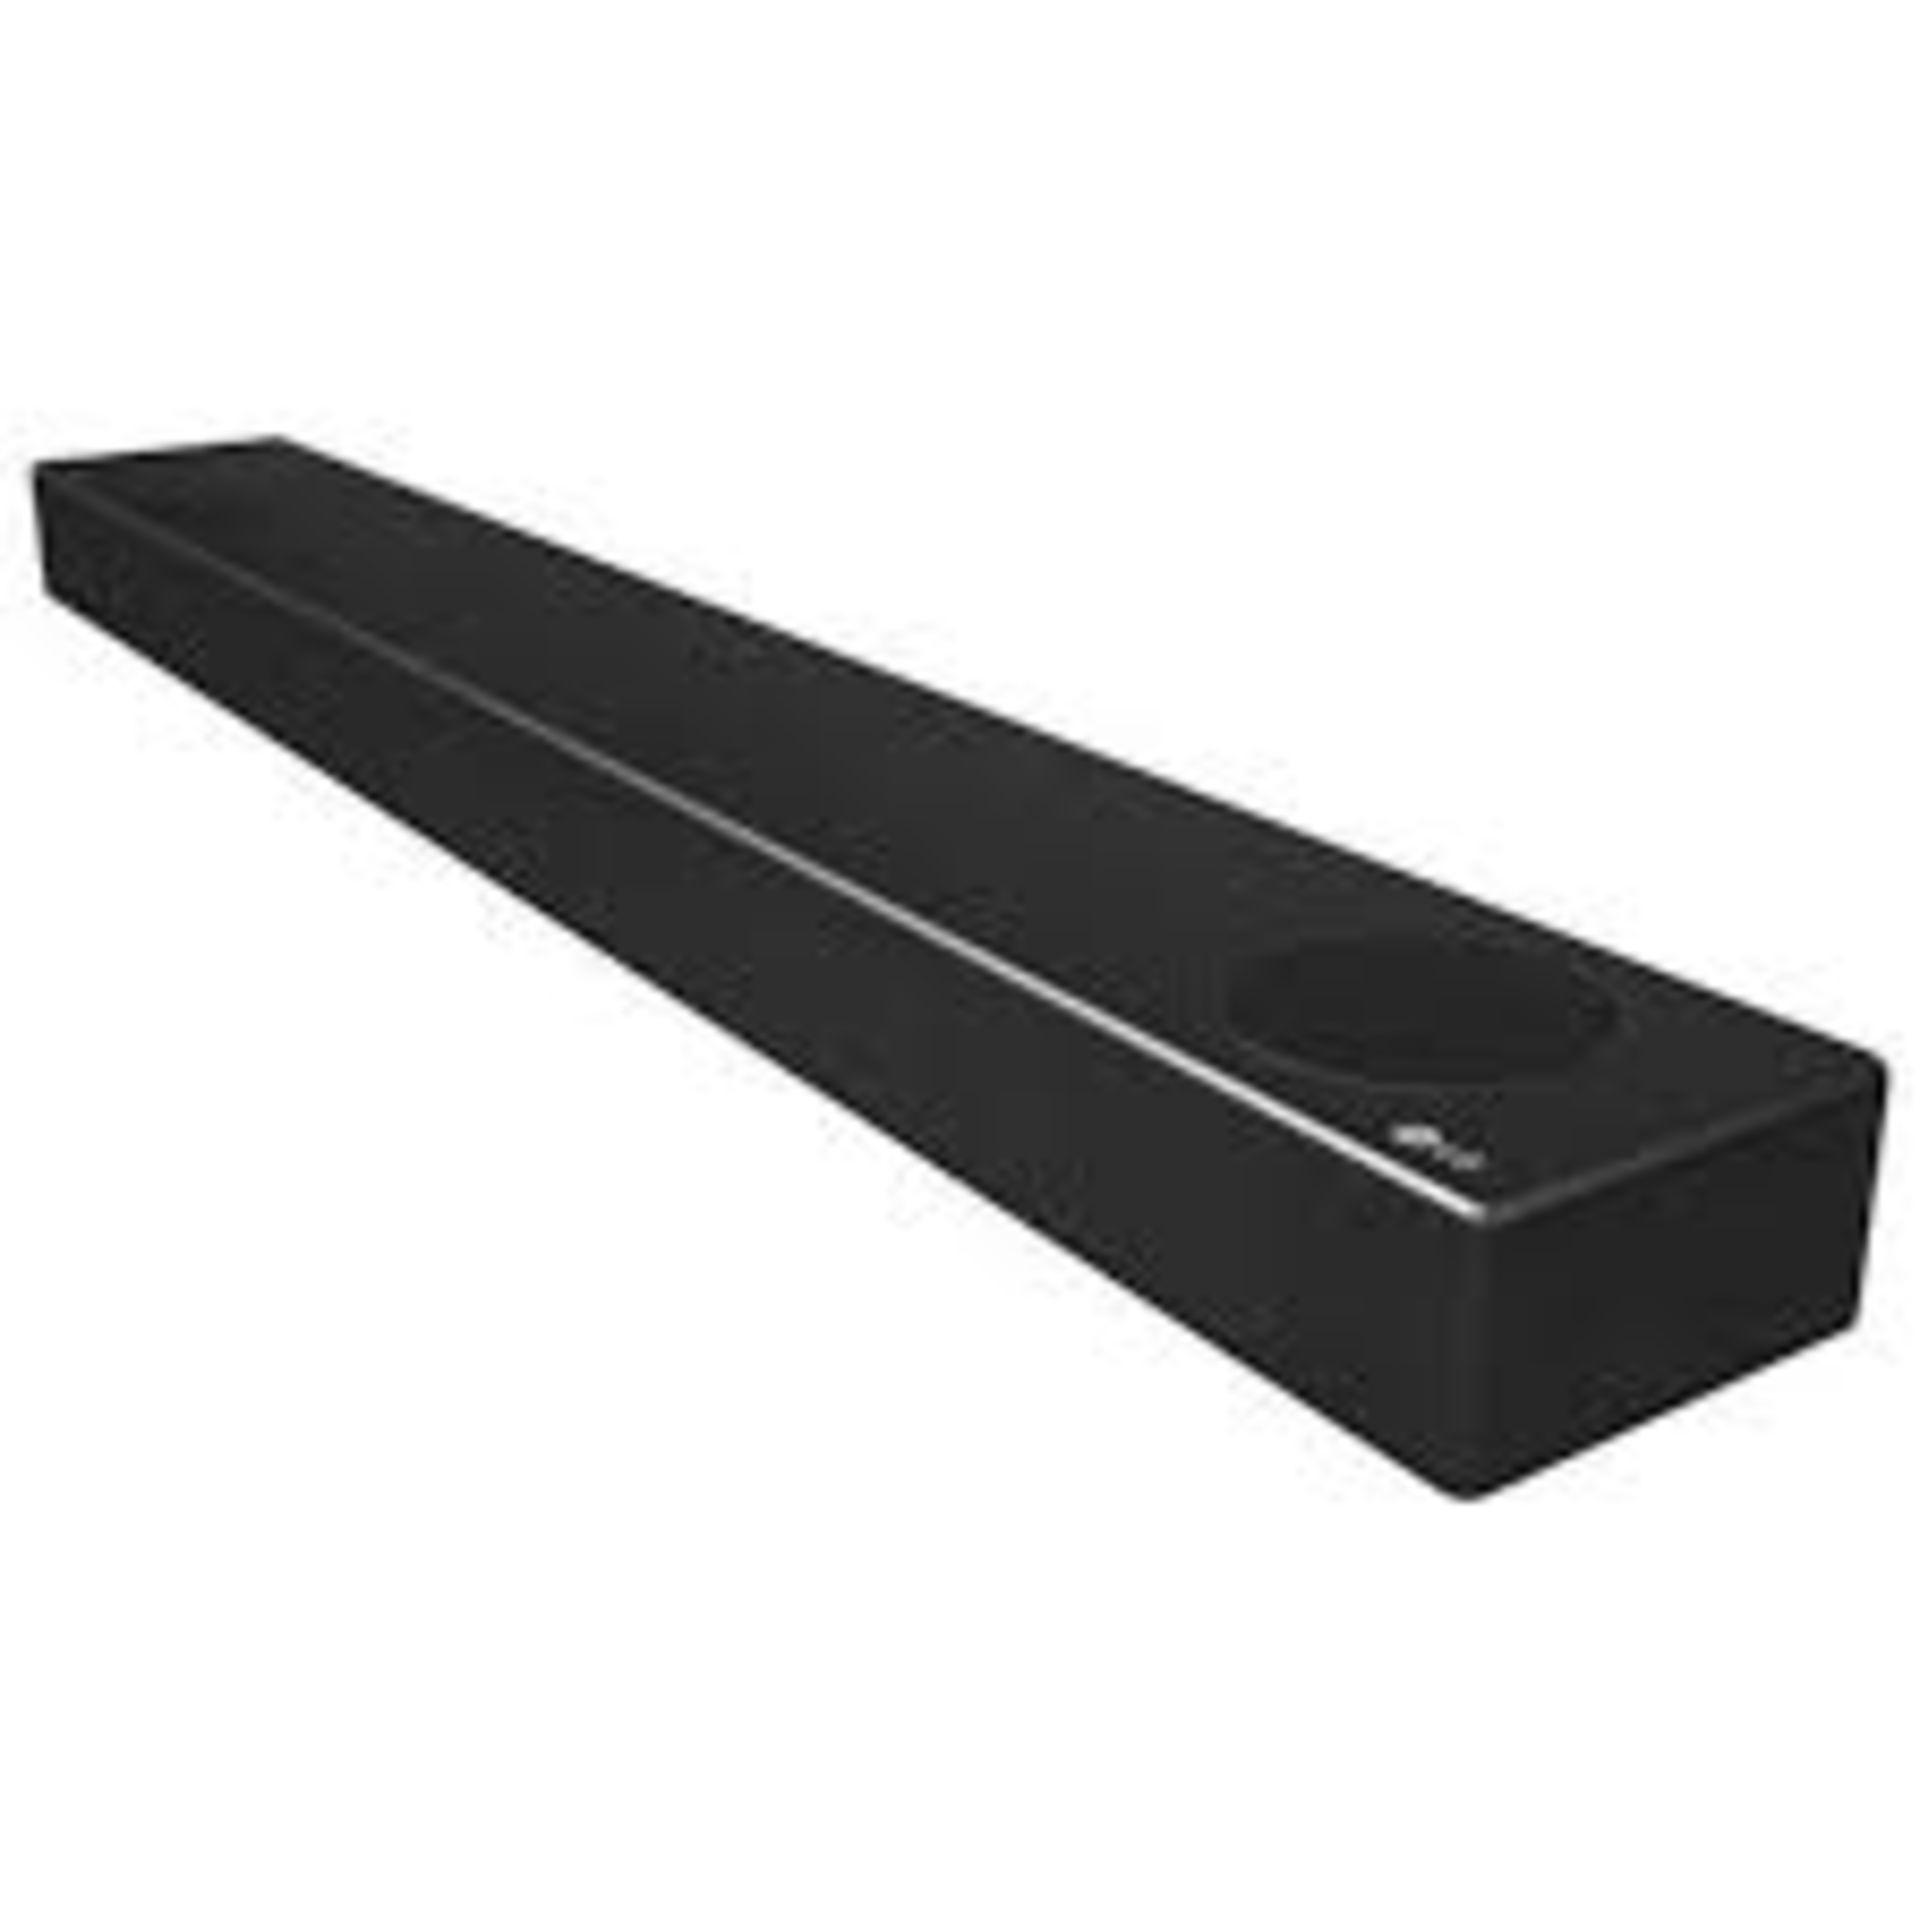 LG SN7CY All-in-one Sound Bar with Dolby Atmos, Black. - PW.